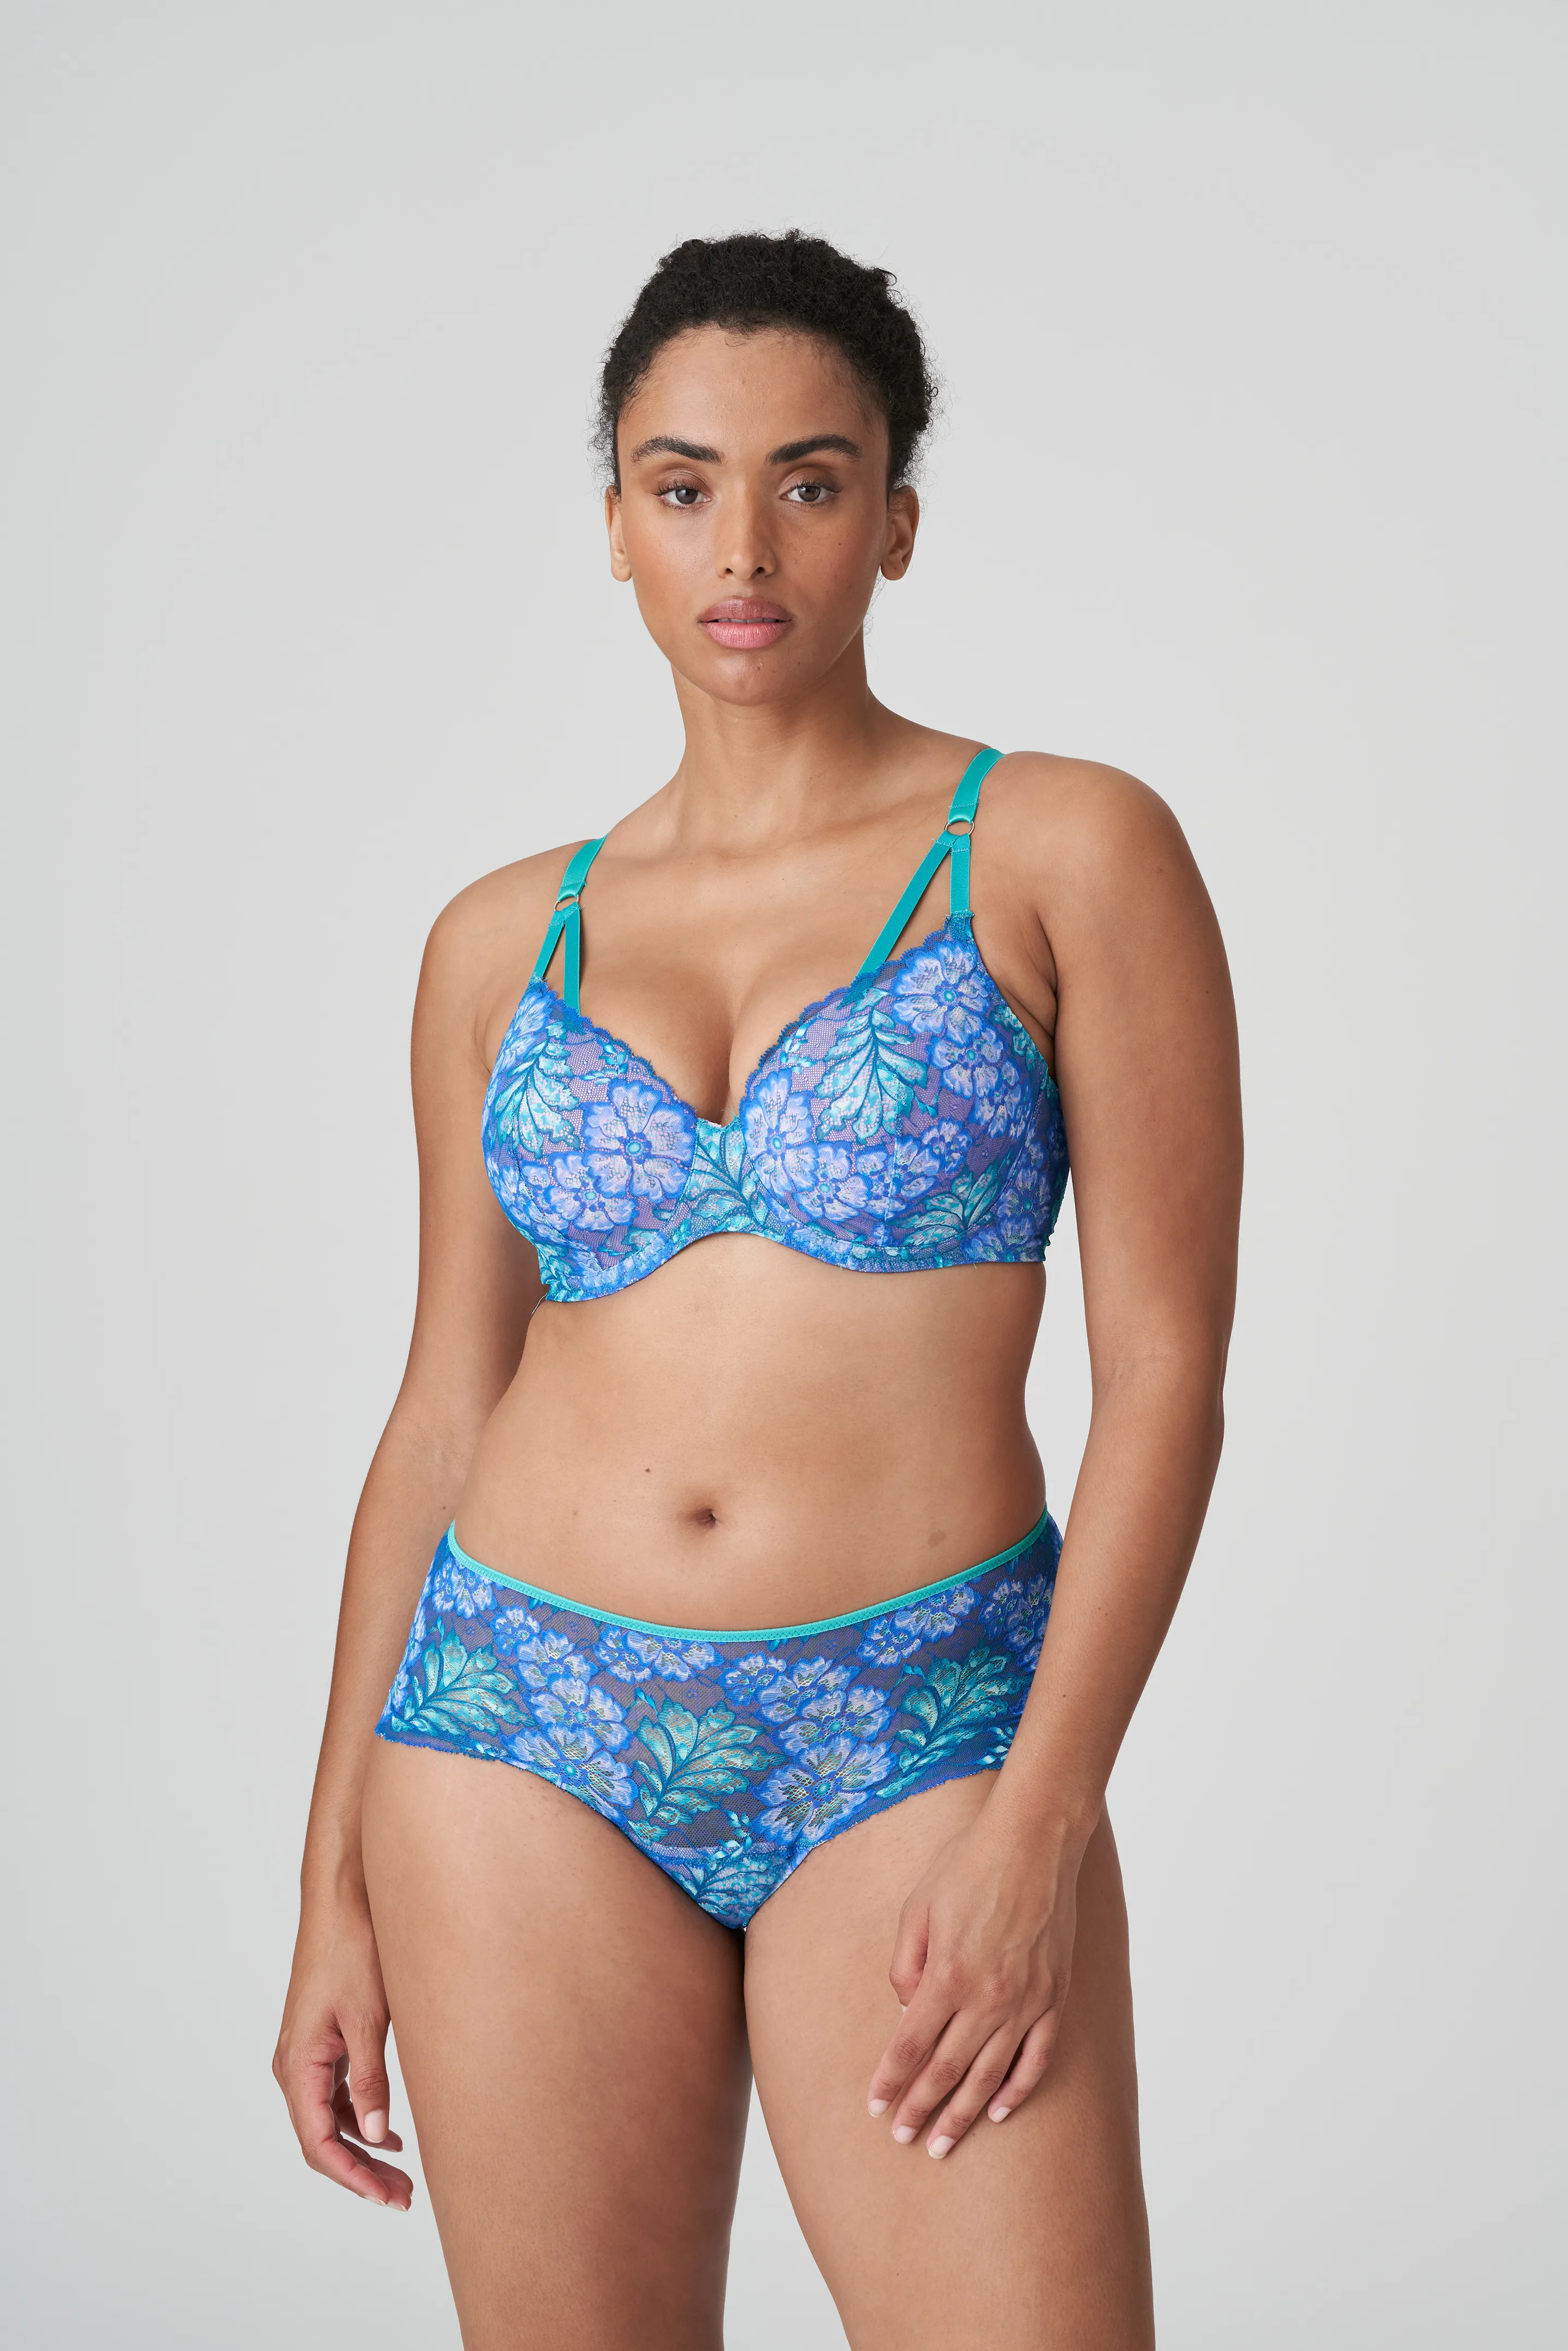 Buy Retro Chic Non-Padded Wired Full Coverage Full Cup Bra - Blue Online